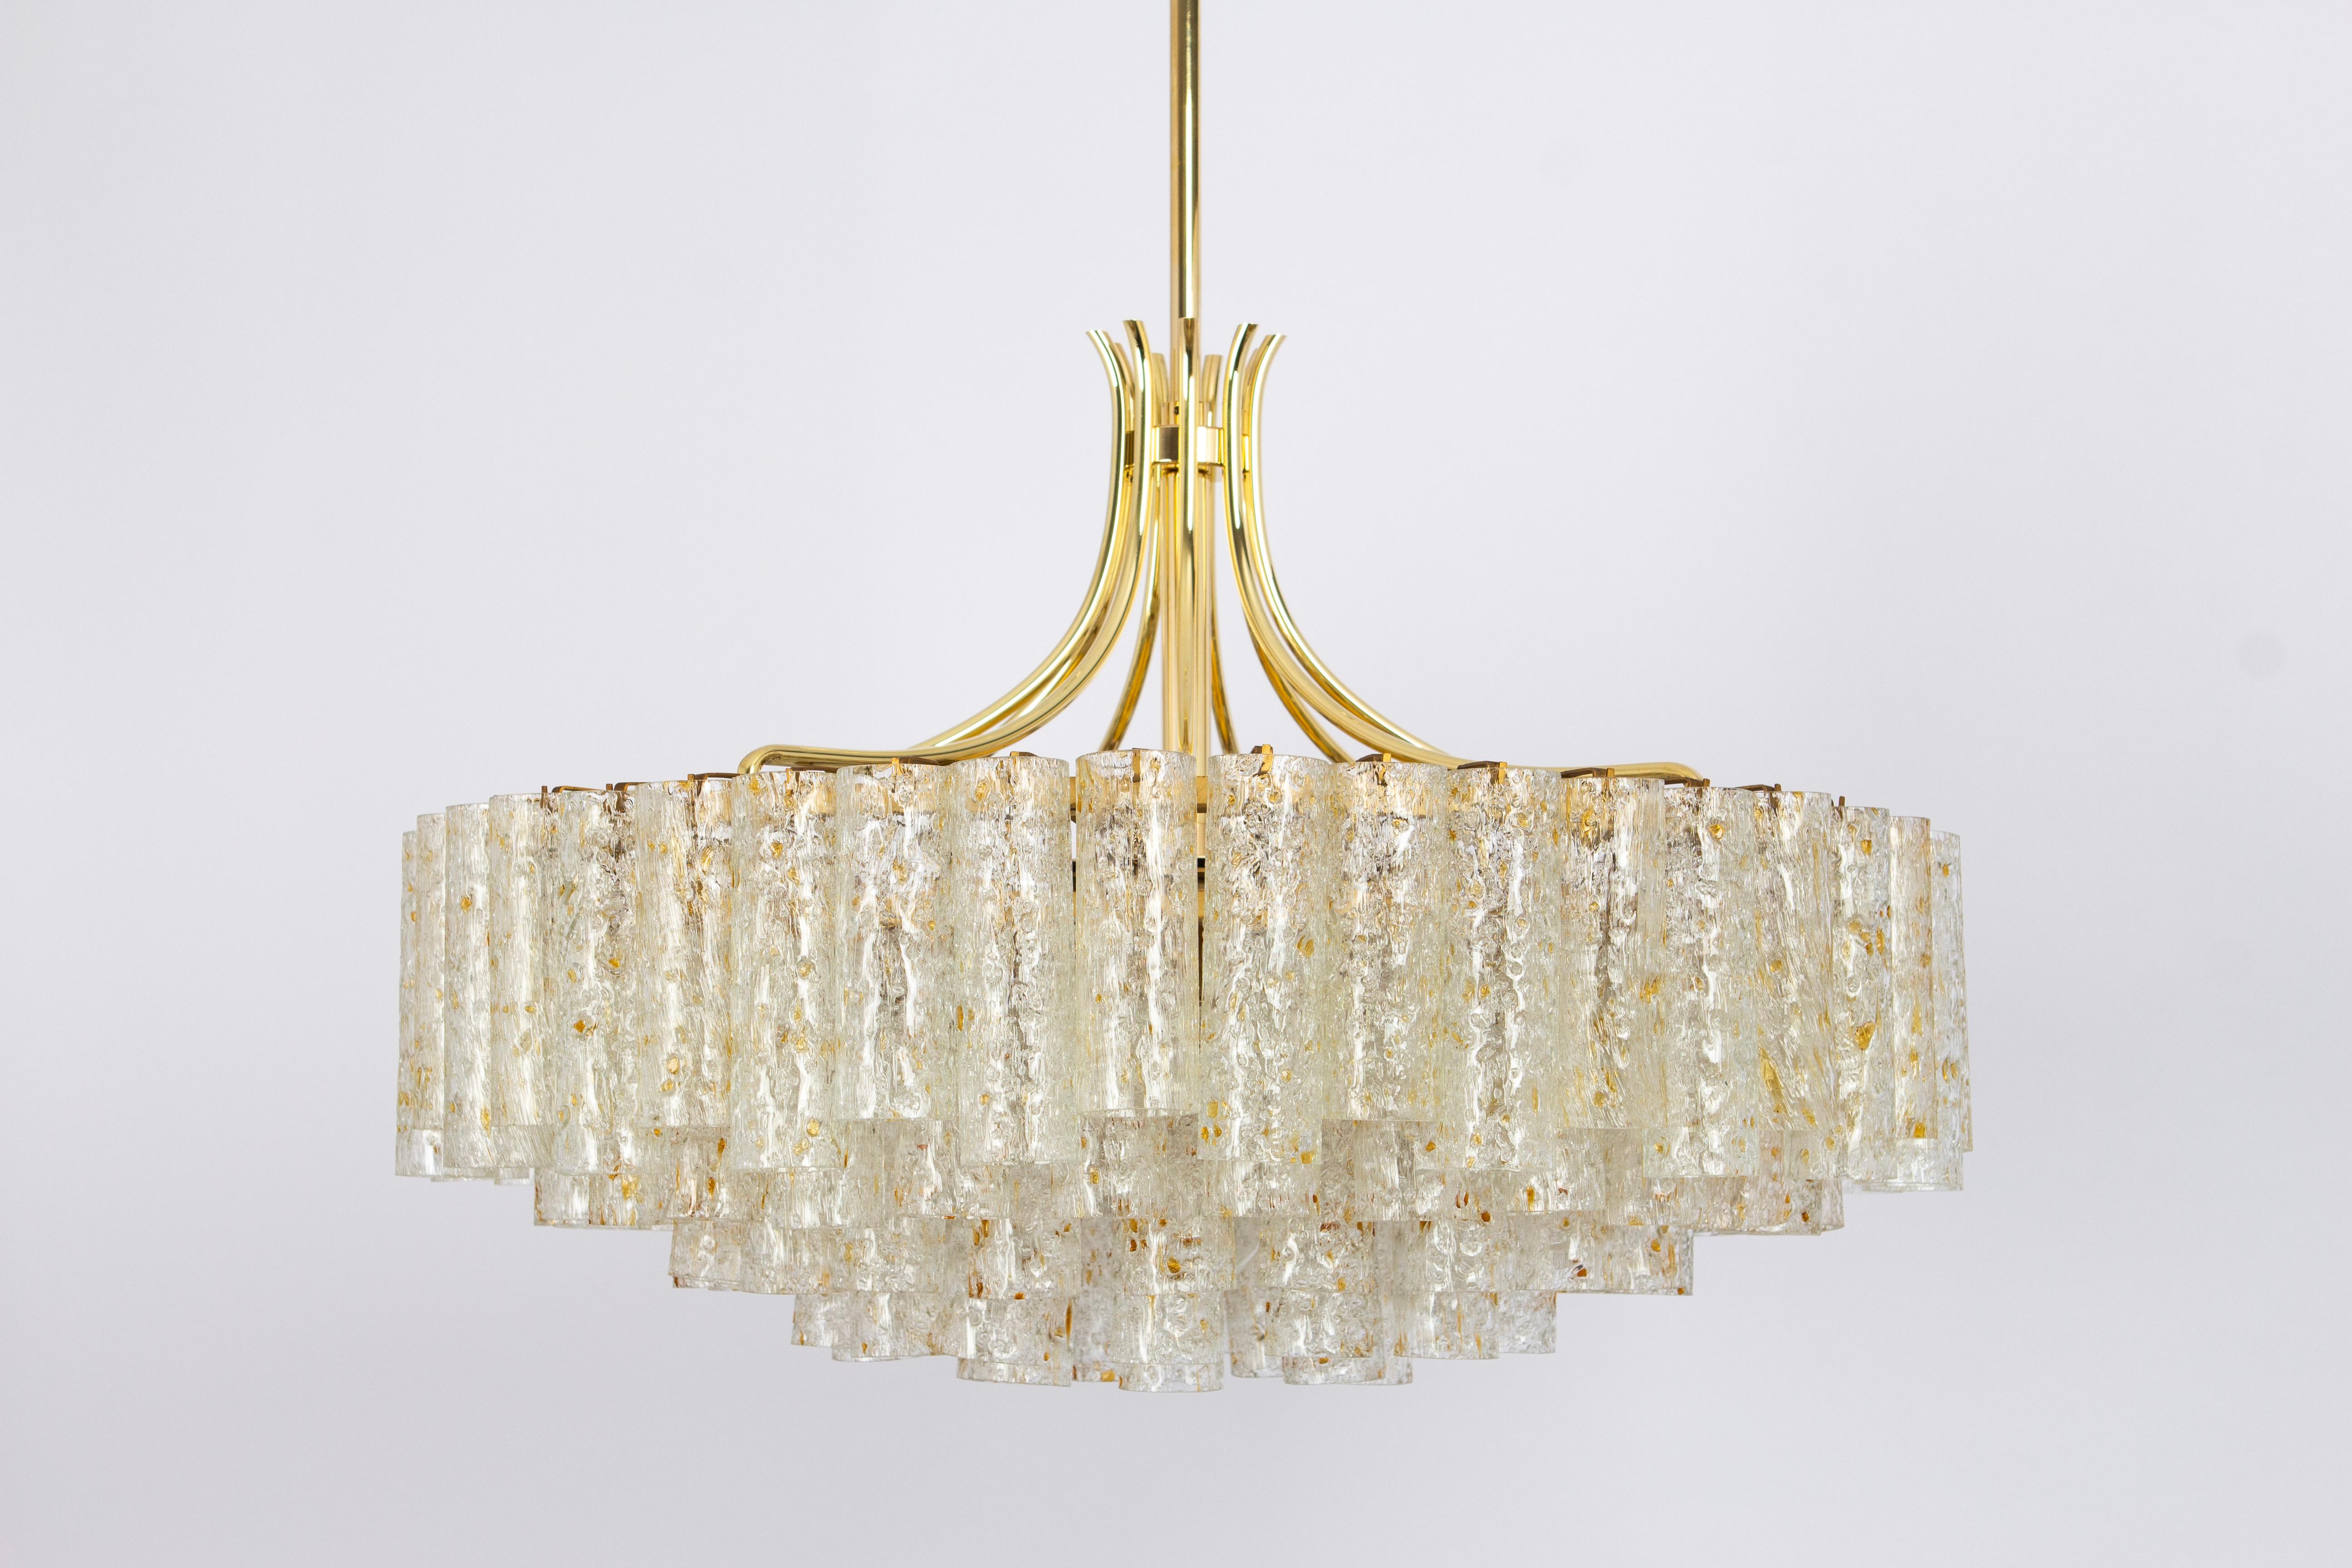 Stunning Five-tier midcentury chandelier by Doria, Germany, manufactured circa 1960-1969. Five rings of Murano glass cylinders( with gold color flakes)  suspended from a fixture.
Wonderful light effect.
Sockets: 7 x E27 standard bulbs (up to 80 W